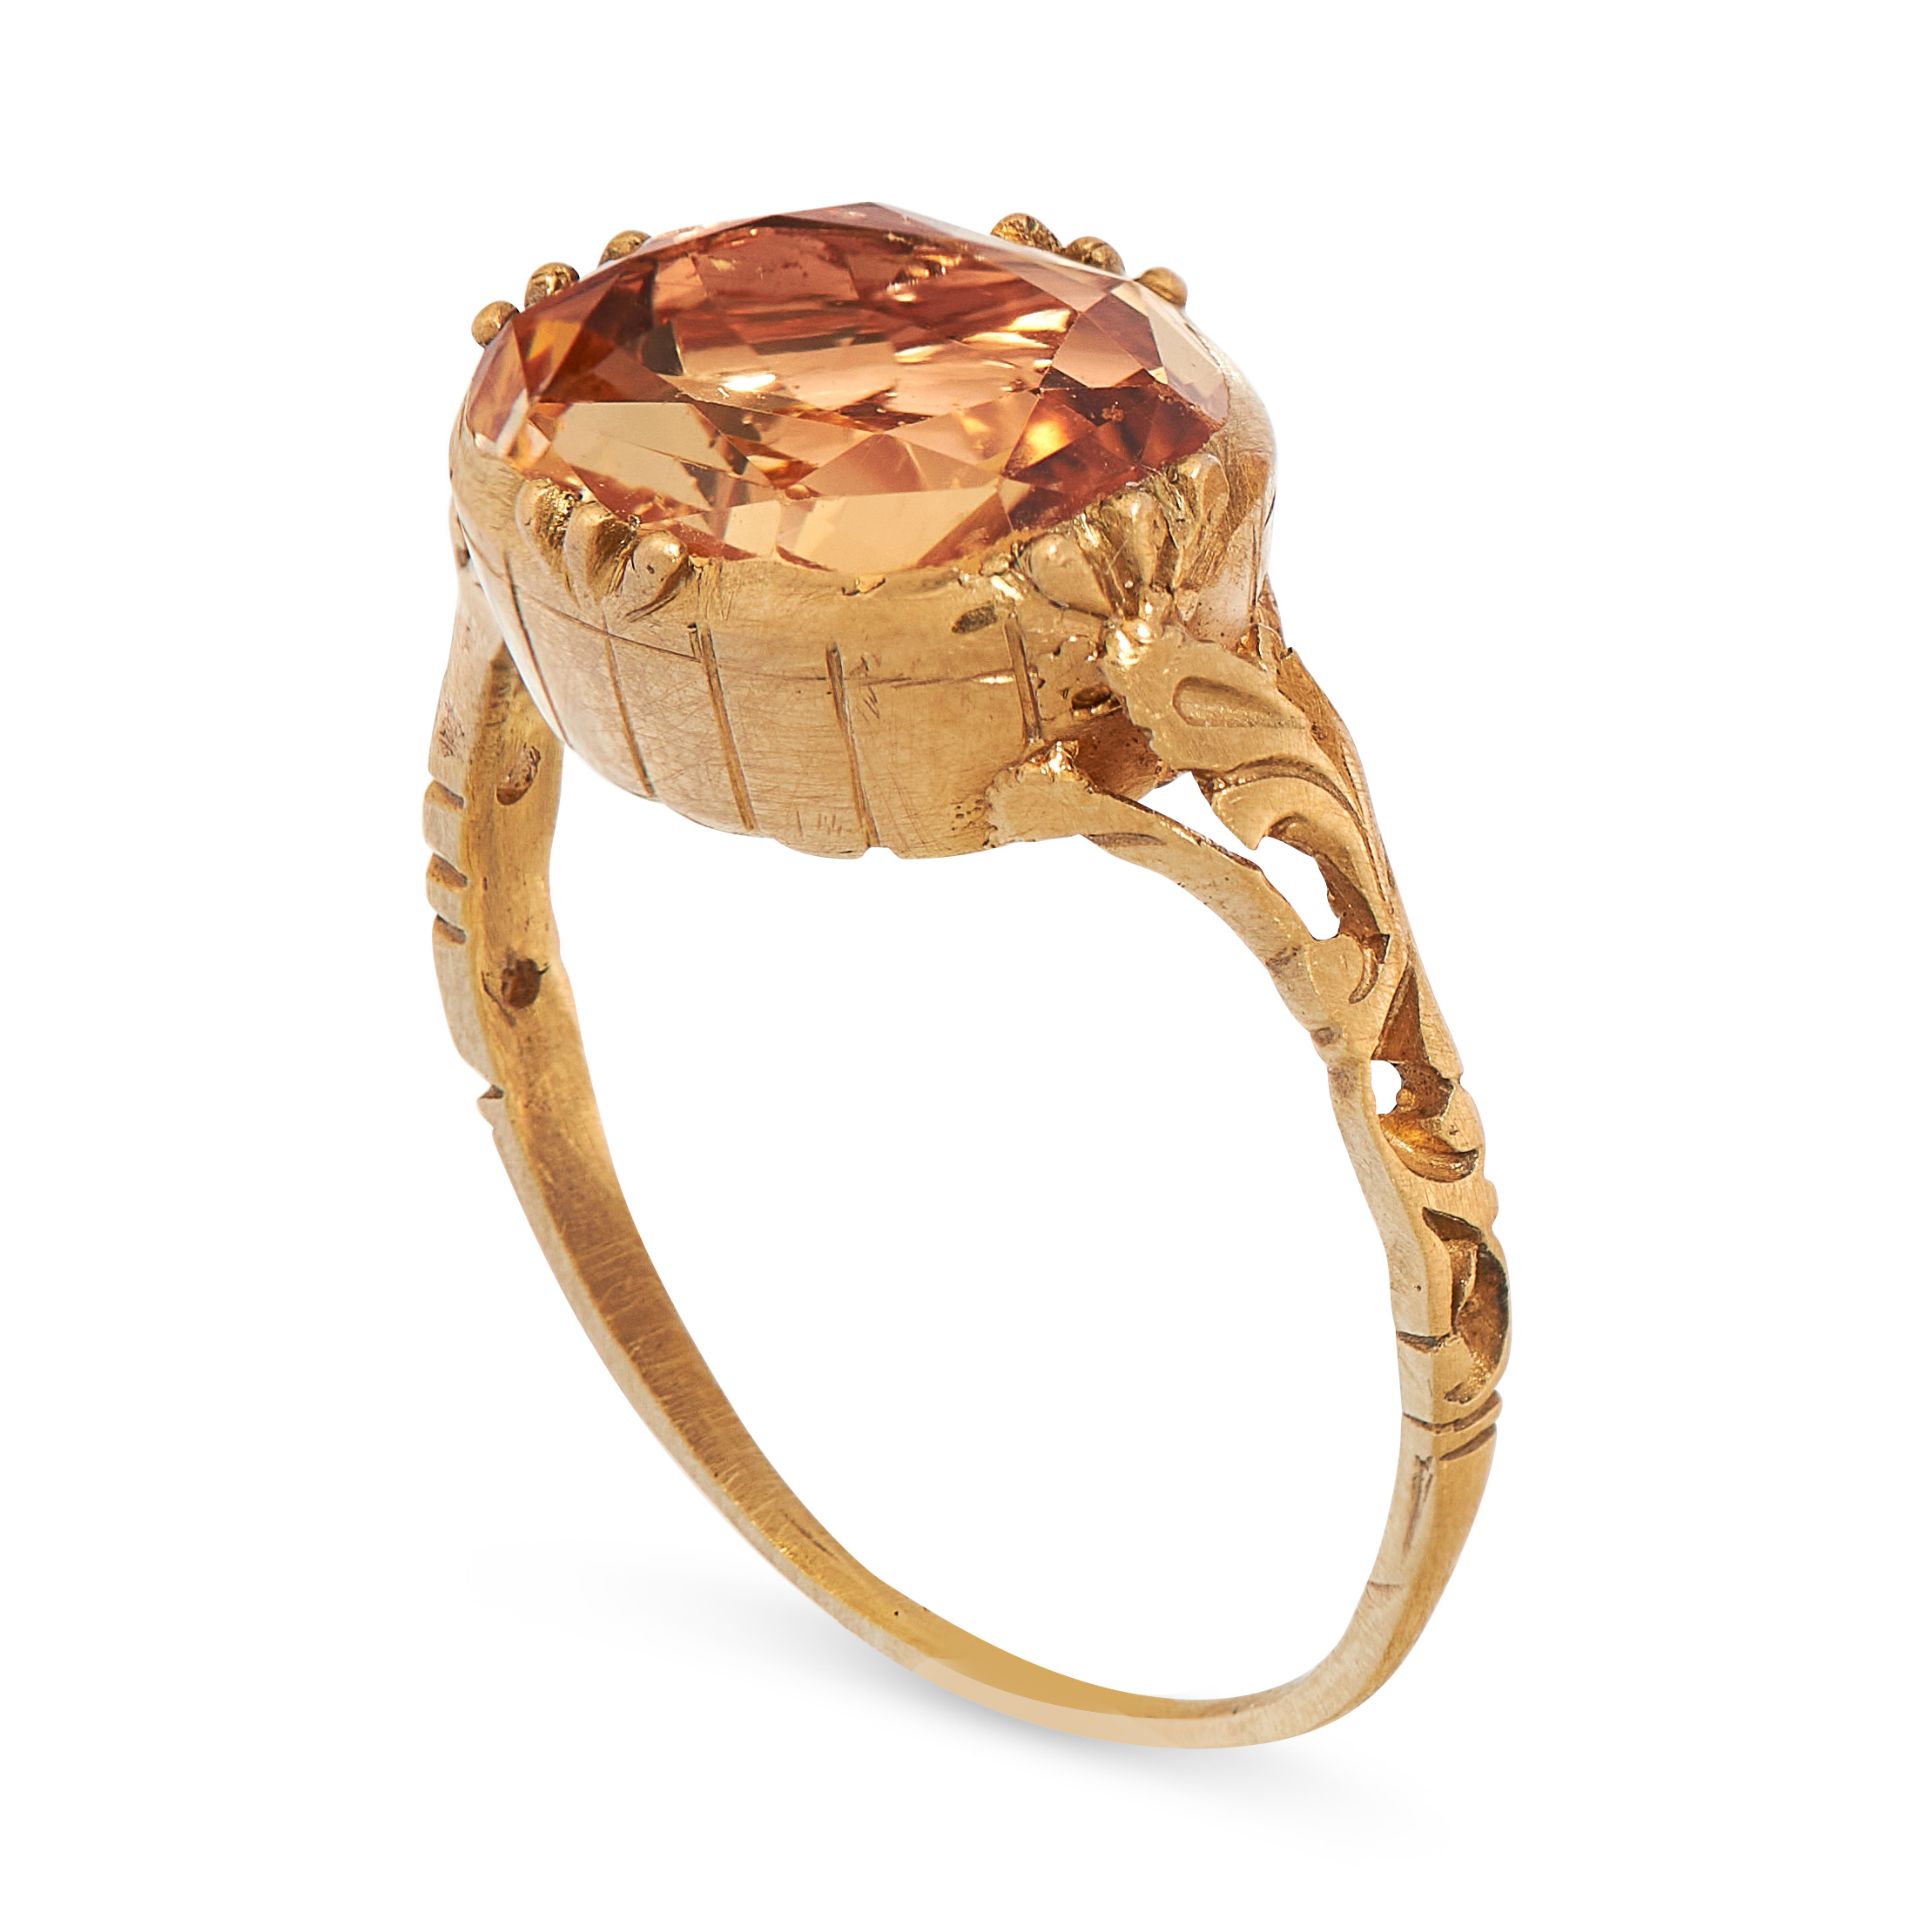 ANTIQUE IMPERIAL TOPAZ RING in yellow gold, set with an oval mixed cut imperial topaz, with - Bild 2 aus 2